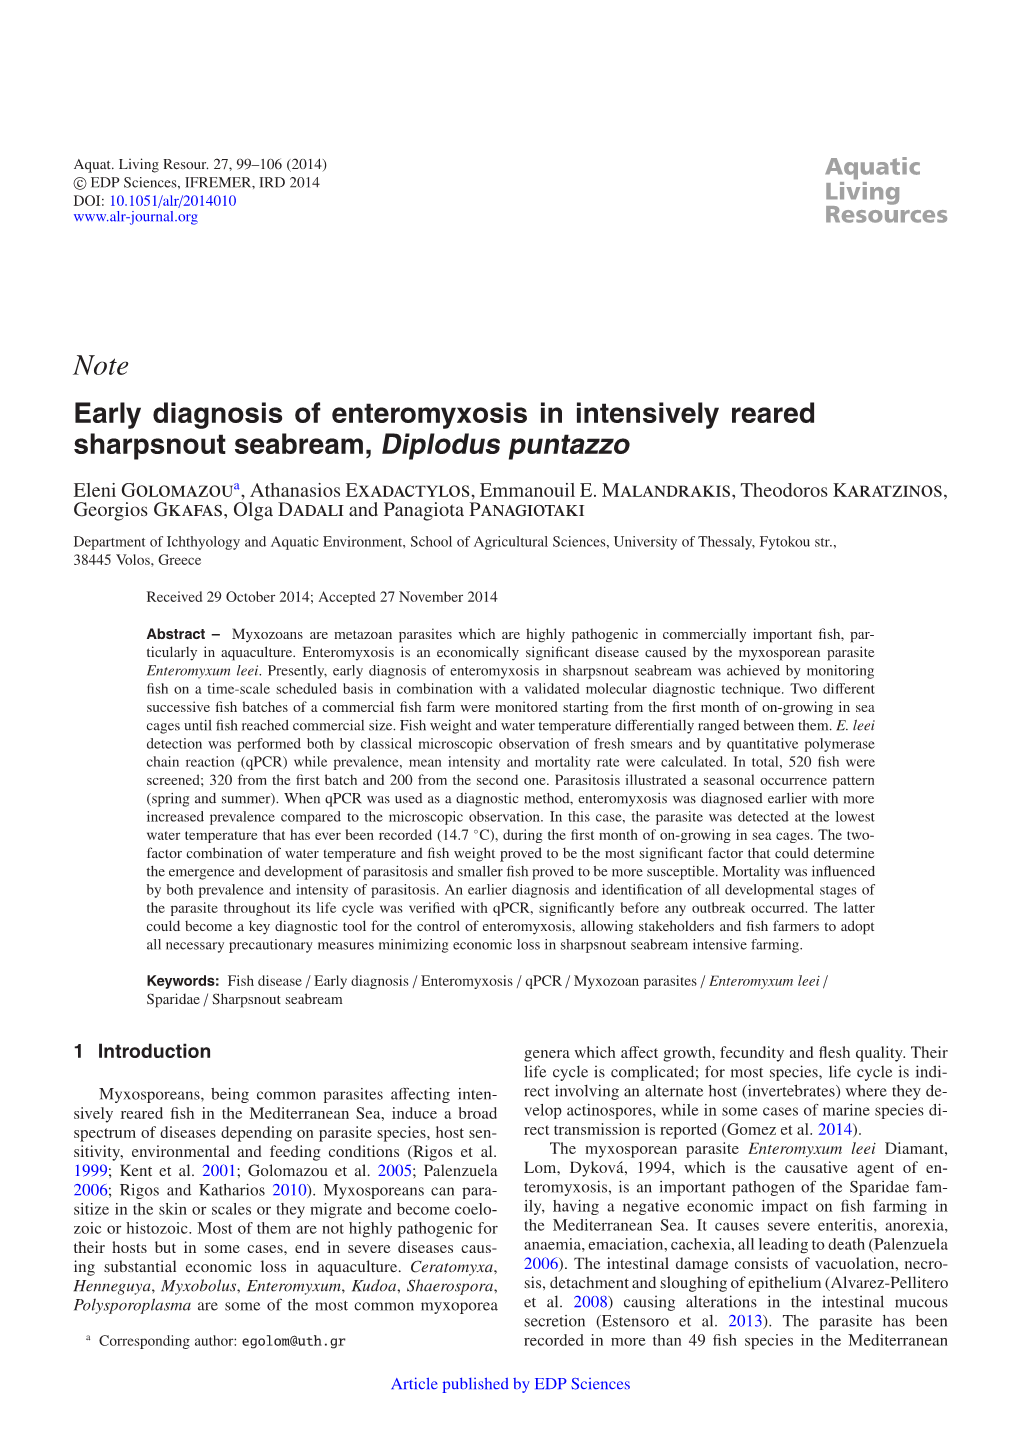 Early Diagnosis of Enteromyxosis in Intensively Reared Sharpsnout Seabream, Diplodus Puntazzo